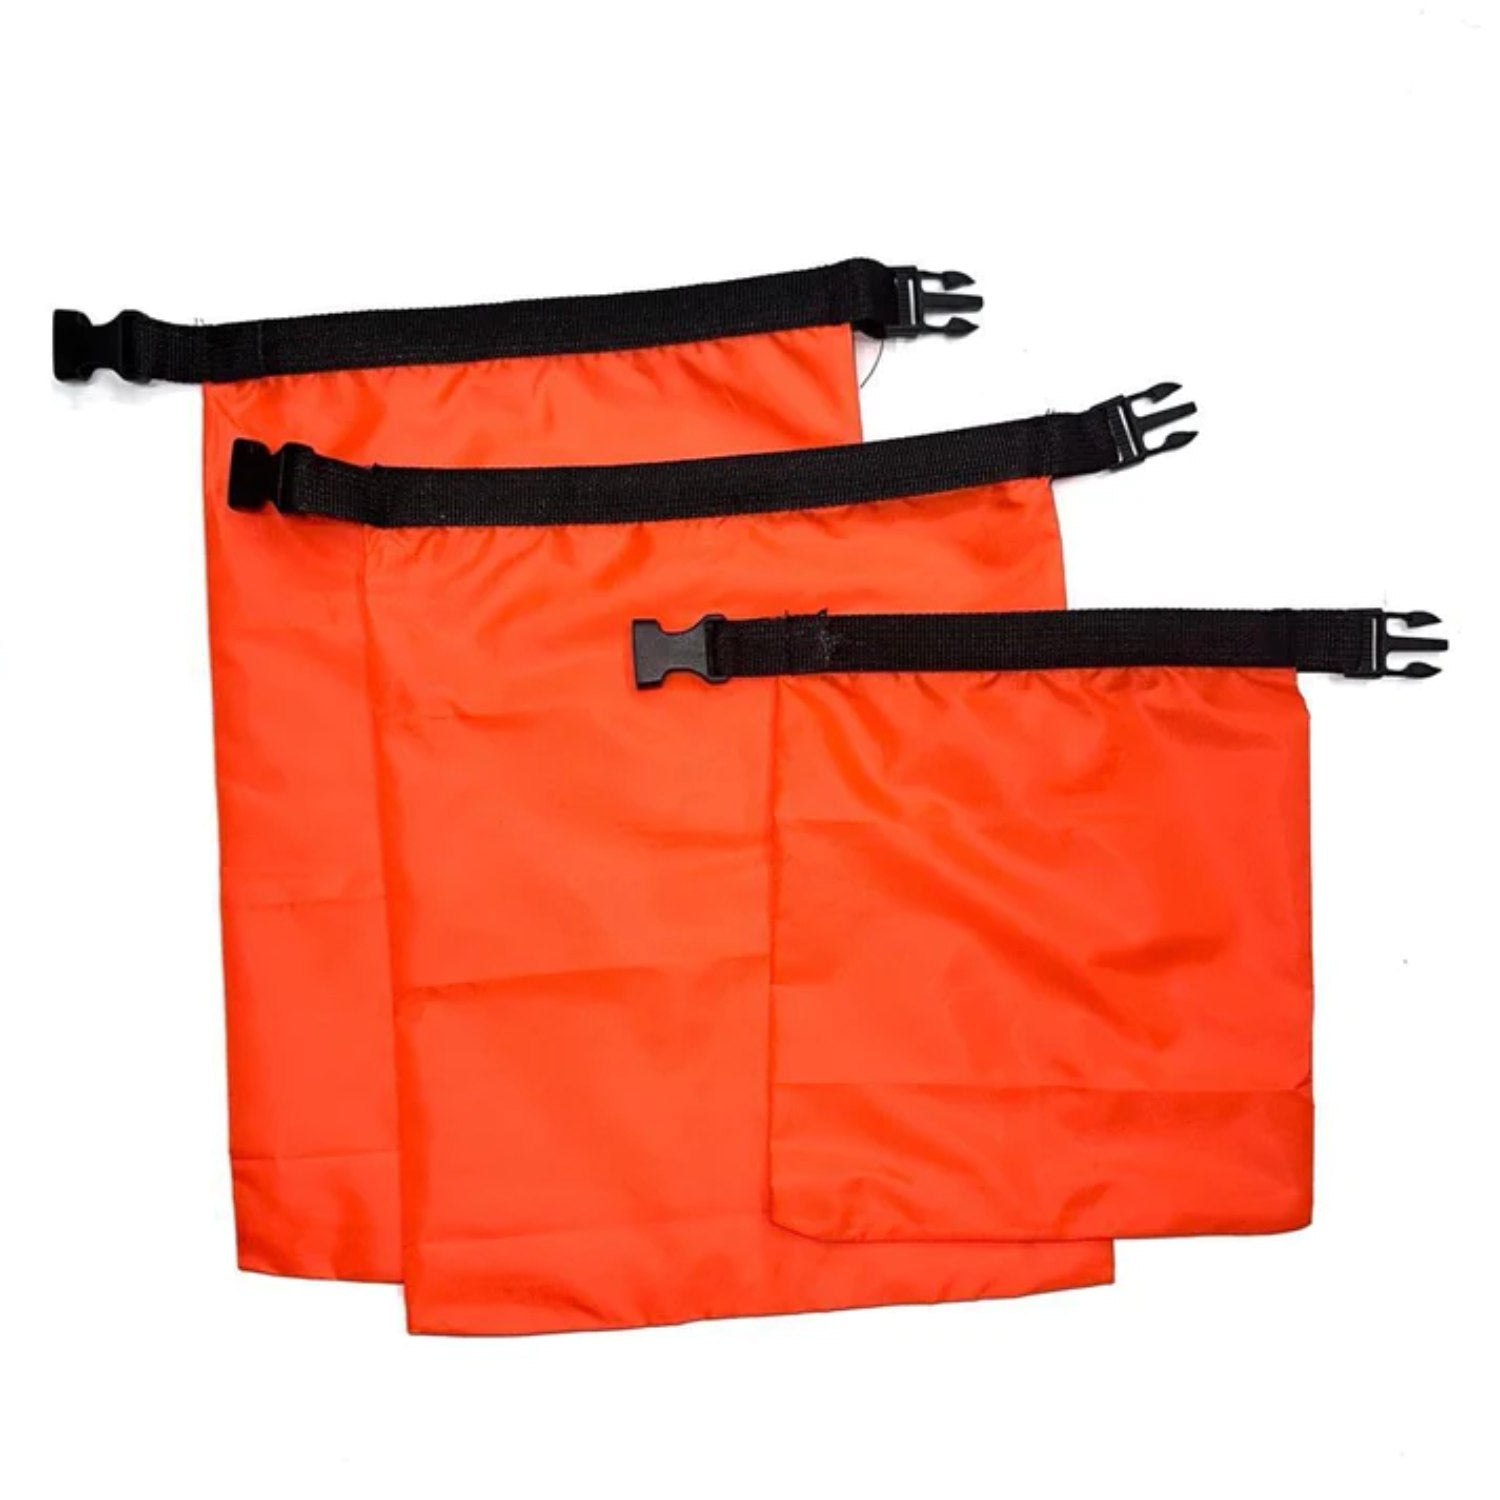 Buy Gokyo Waterproof Dry Sack Ultralight Set of 3 - (1, 1.5, 2 Ltr) | Waterproof Dry Bags, Pouches at Gokyo Outdoor Clothing & Gear